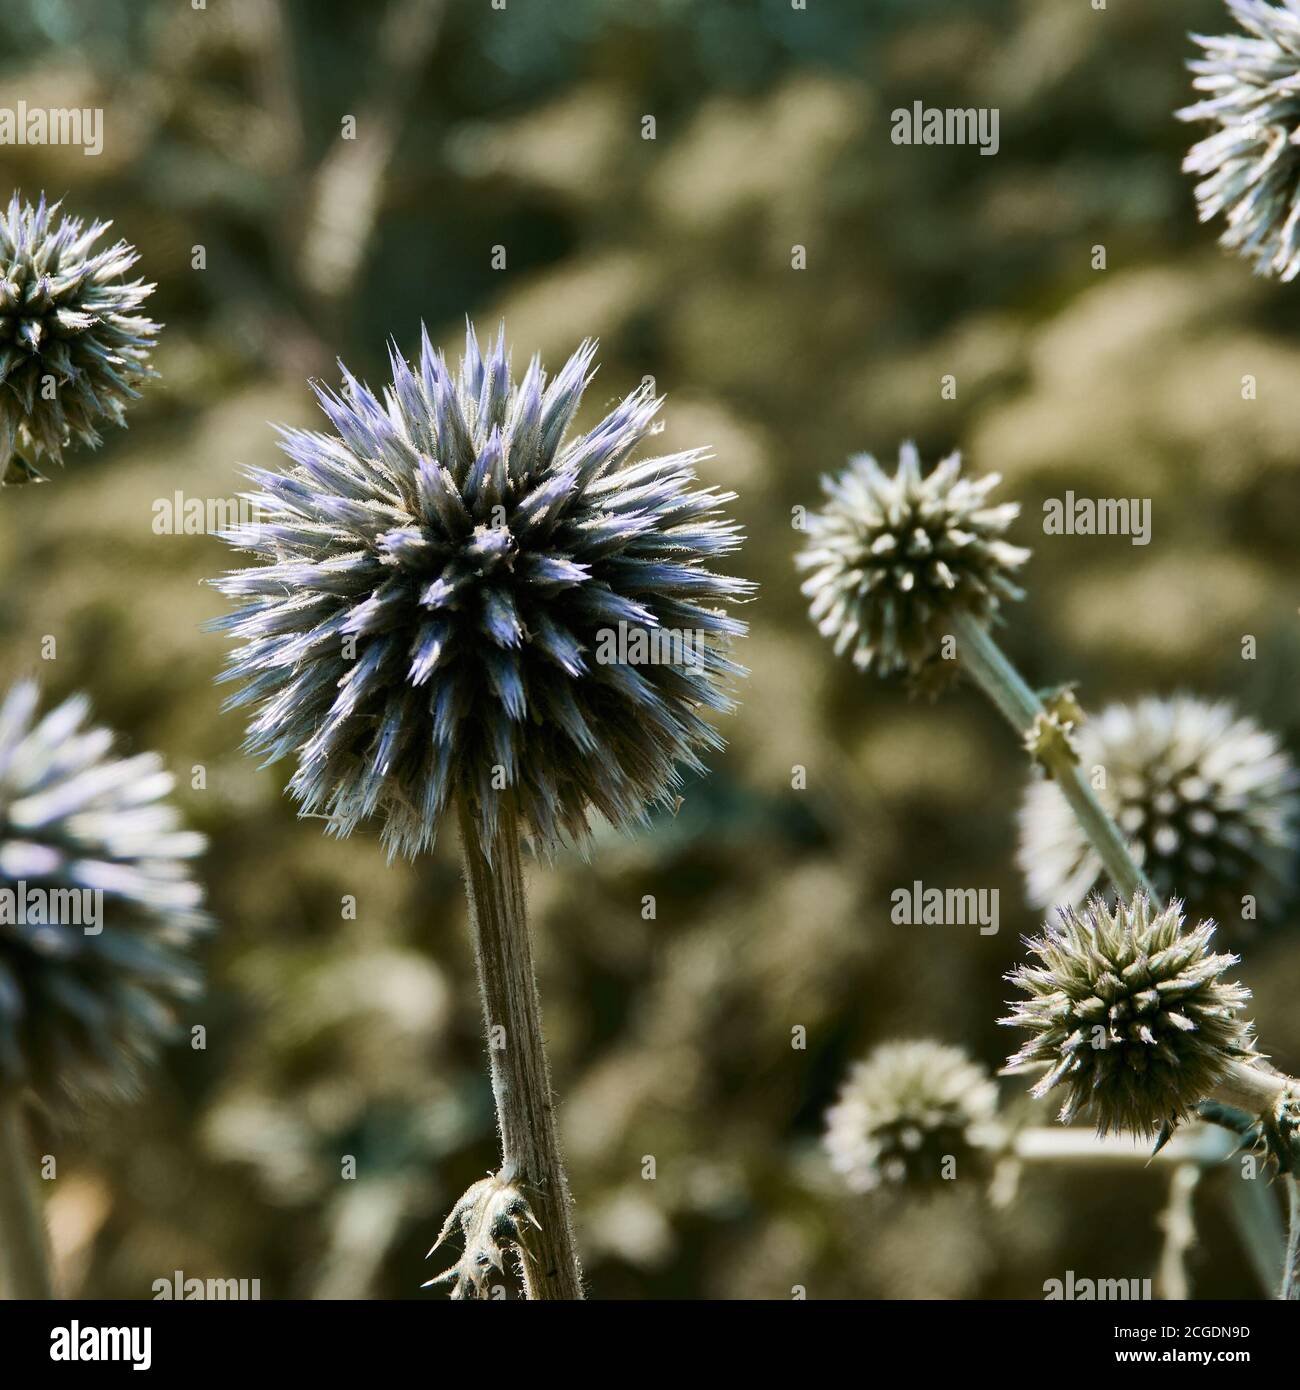 Globe thistle, Echinops ritro, is a plant from aster family. Stock Photo